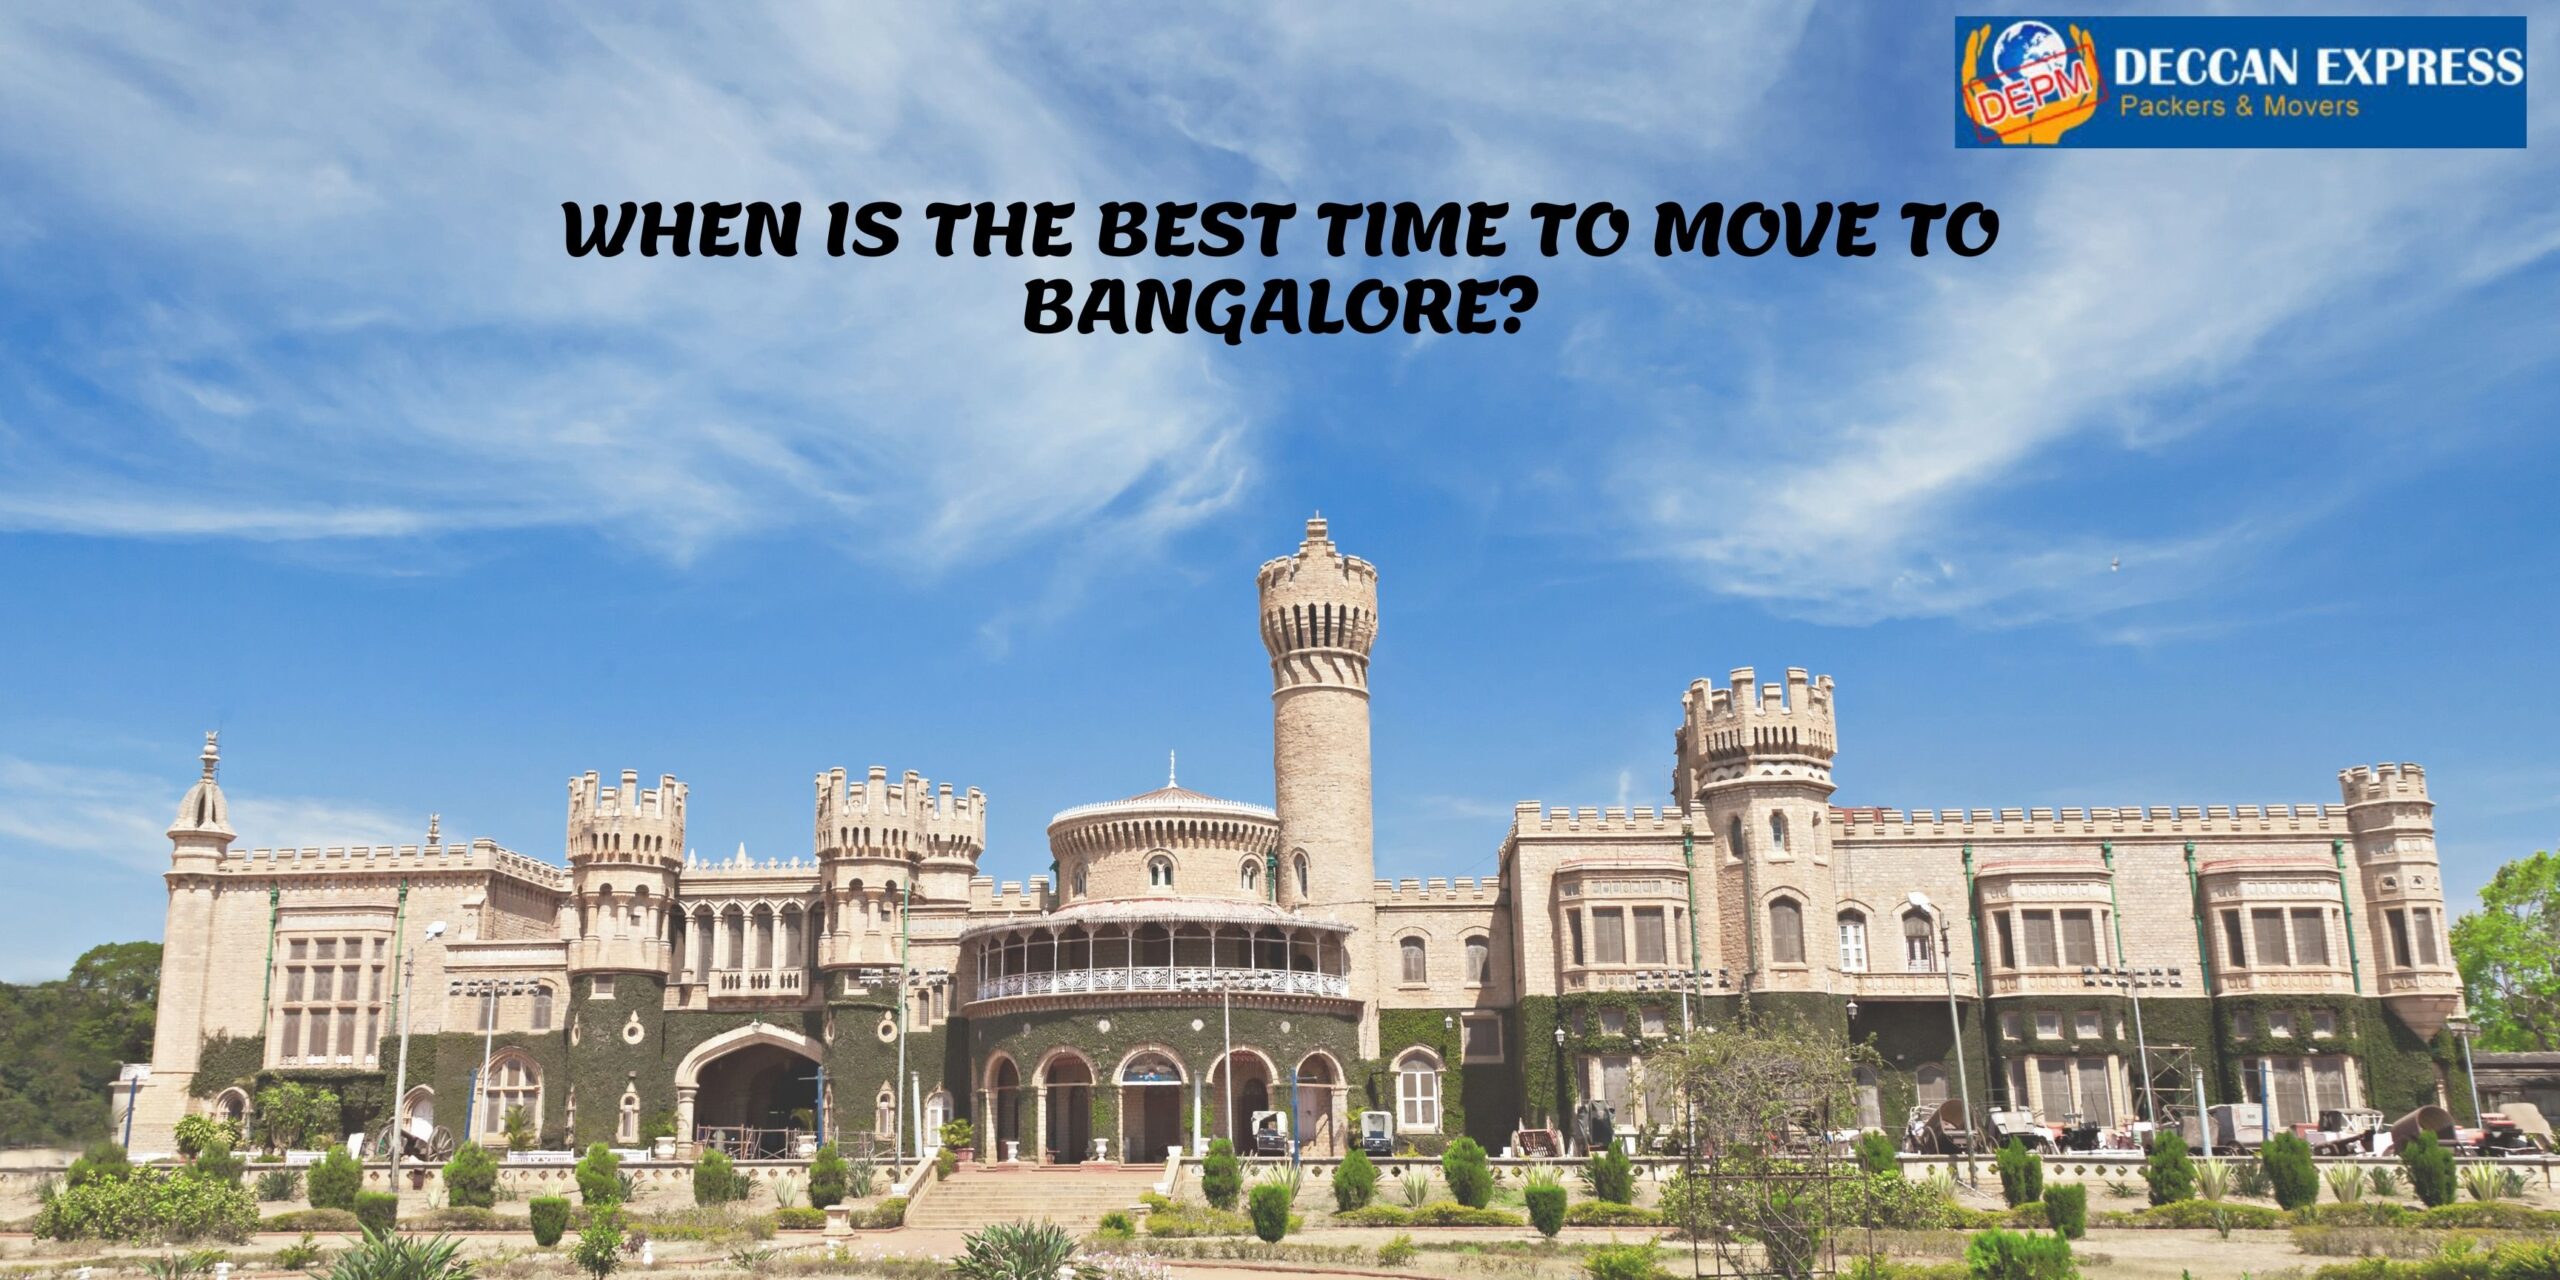 WHEN IS THE BEST TIME TO MOVE TO BANGALORE?